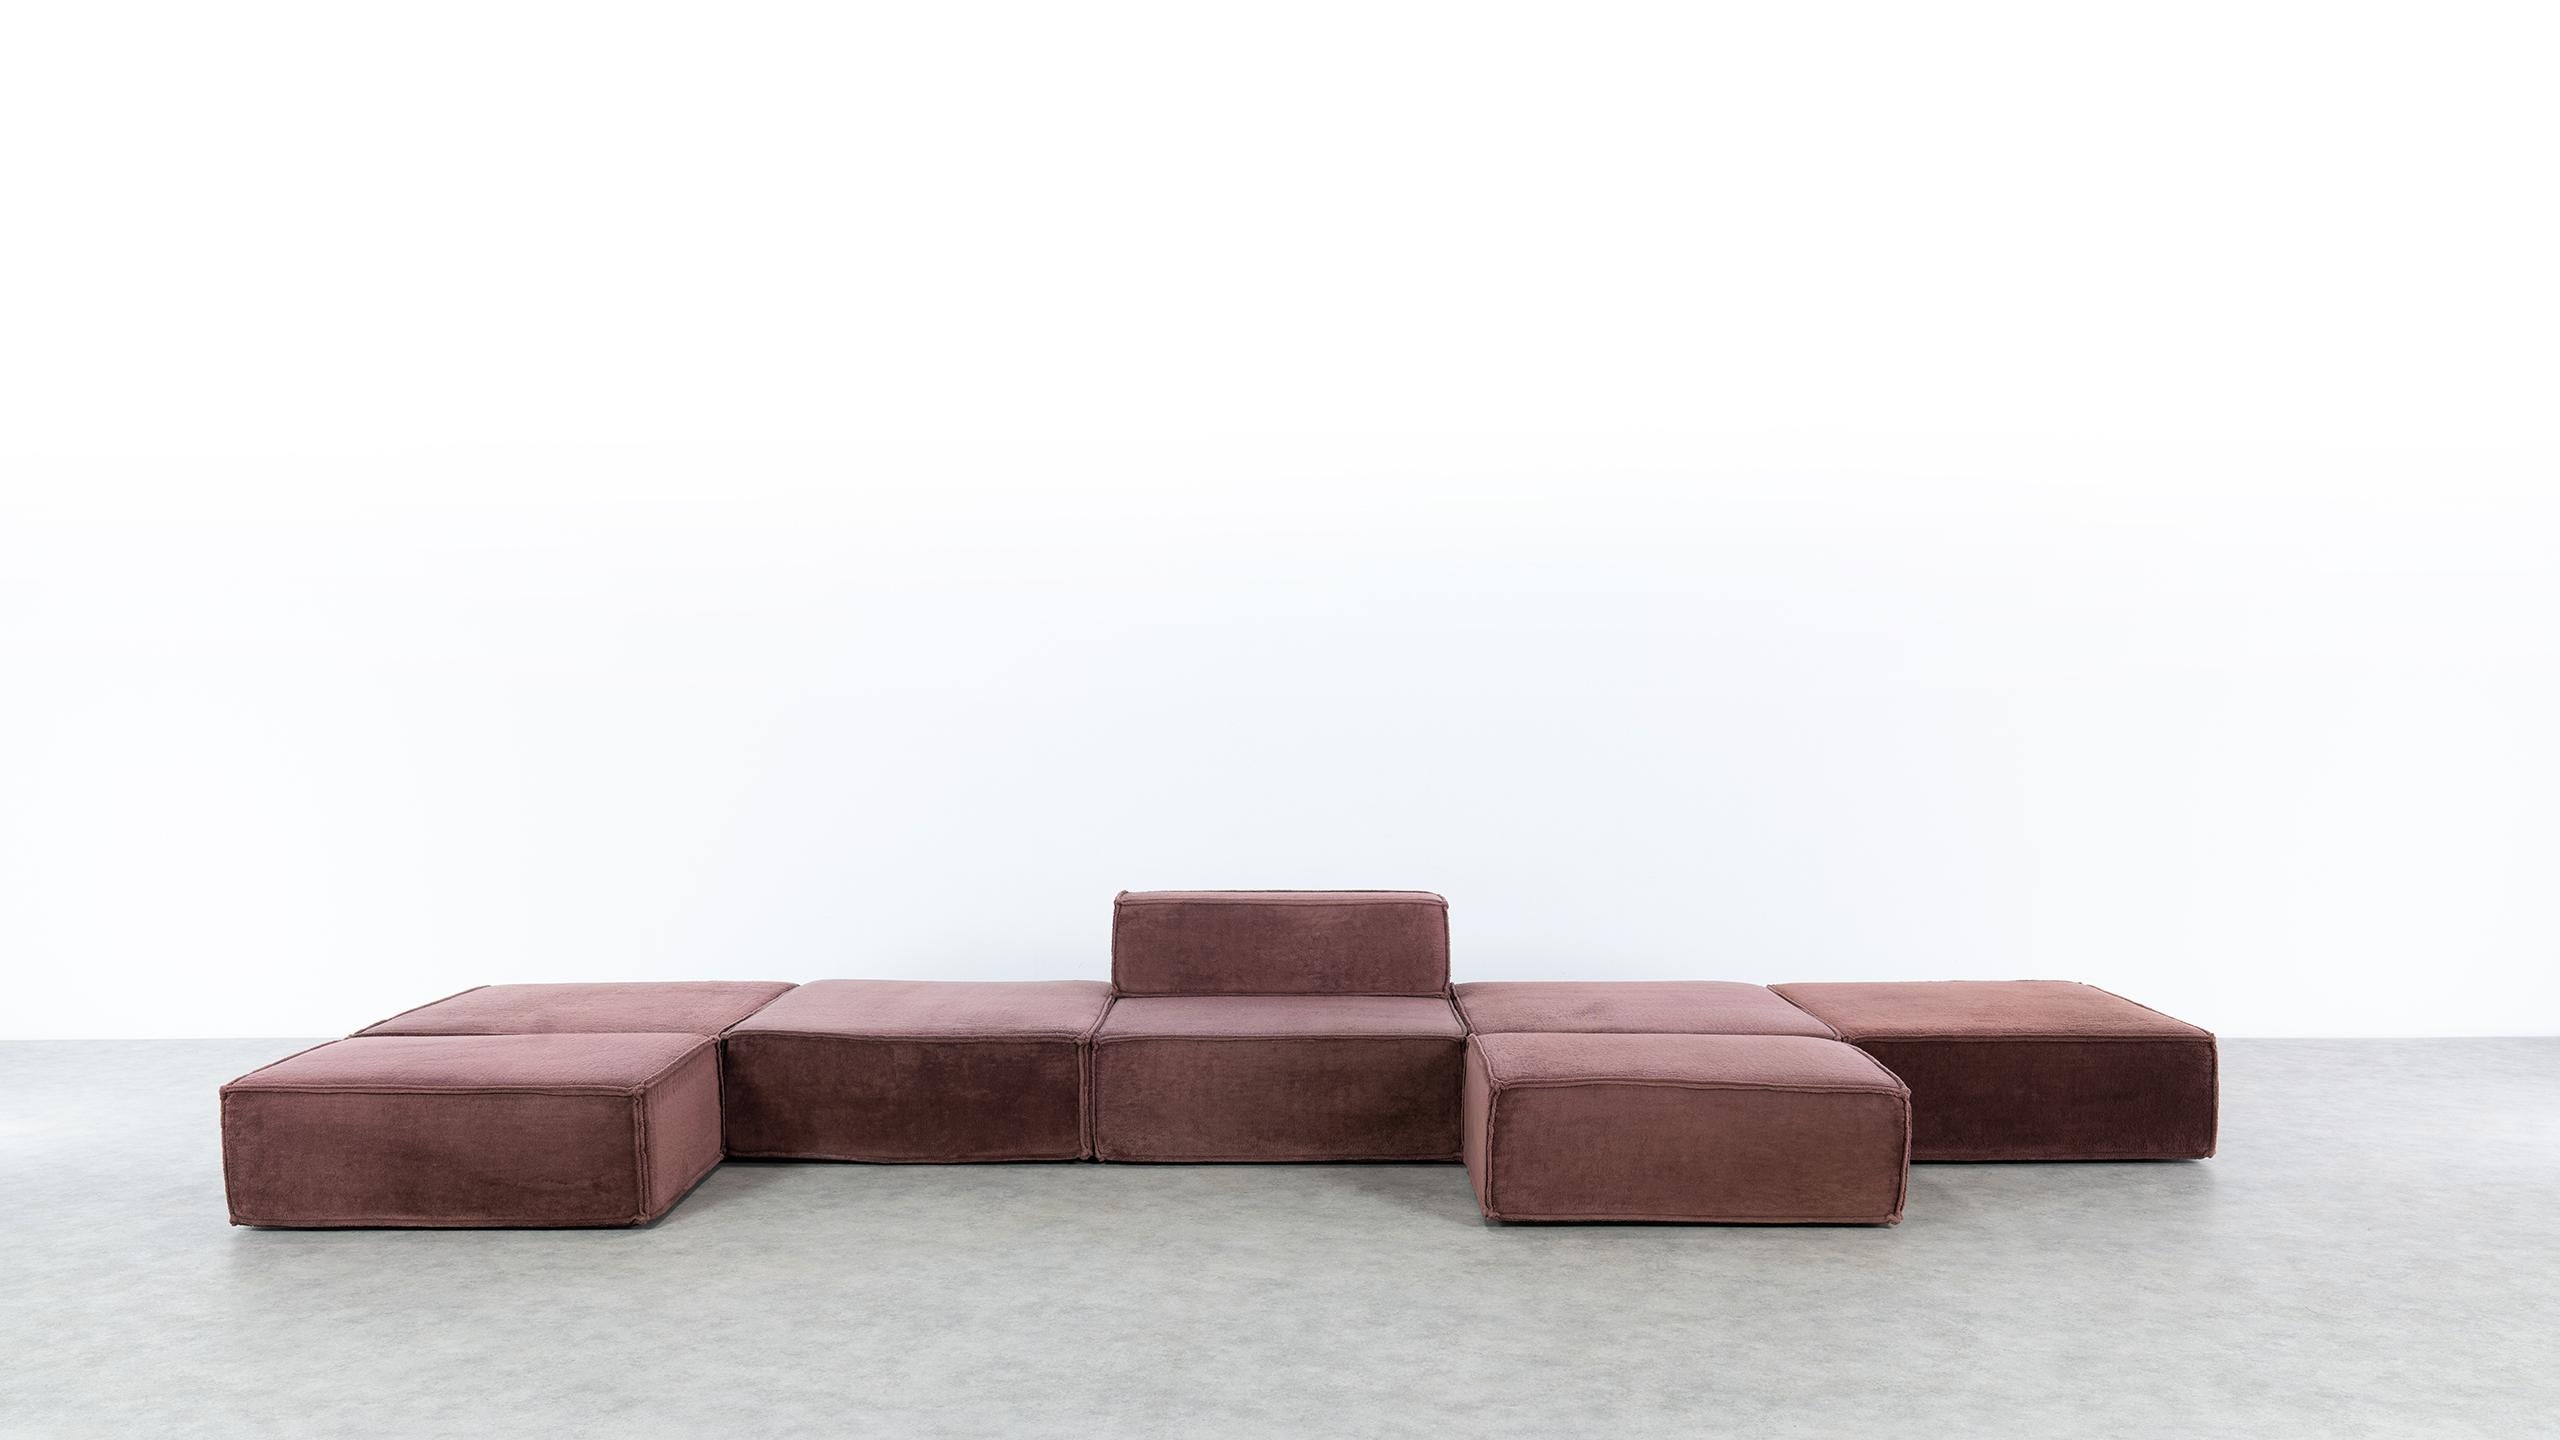 COR Trio Modular Sofa, Giant Landscape in Brown, 1972 by Team Form AG, Swiss 3